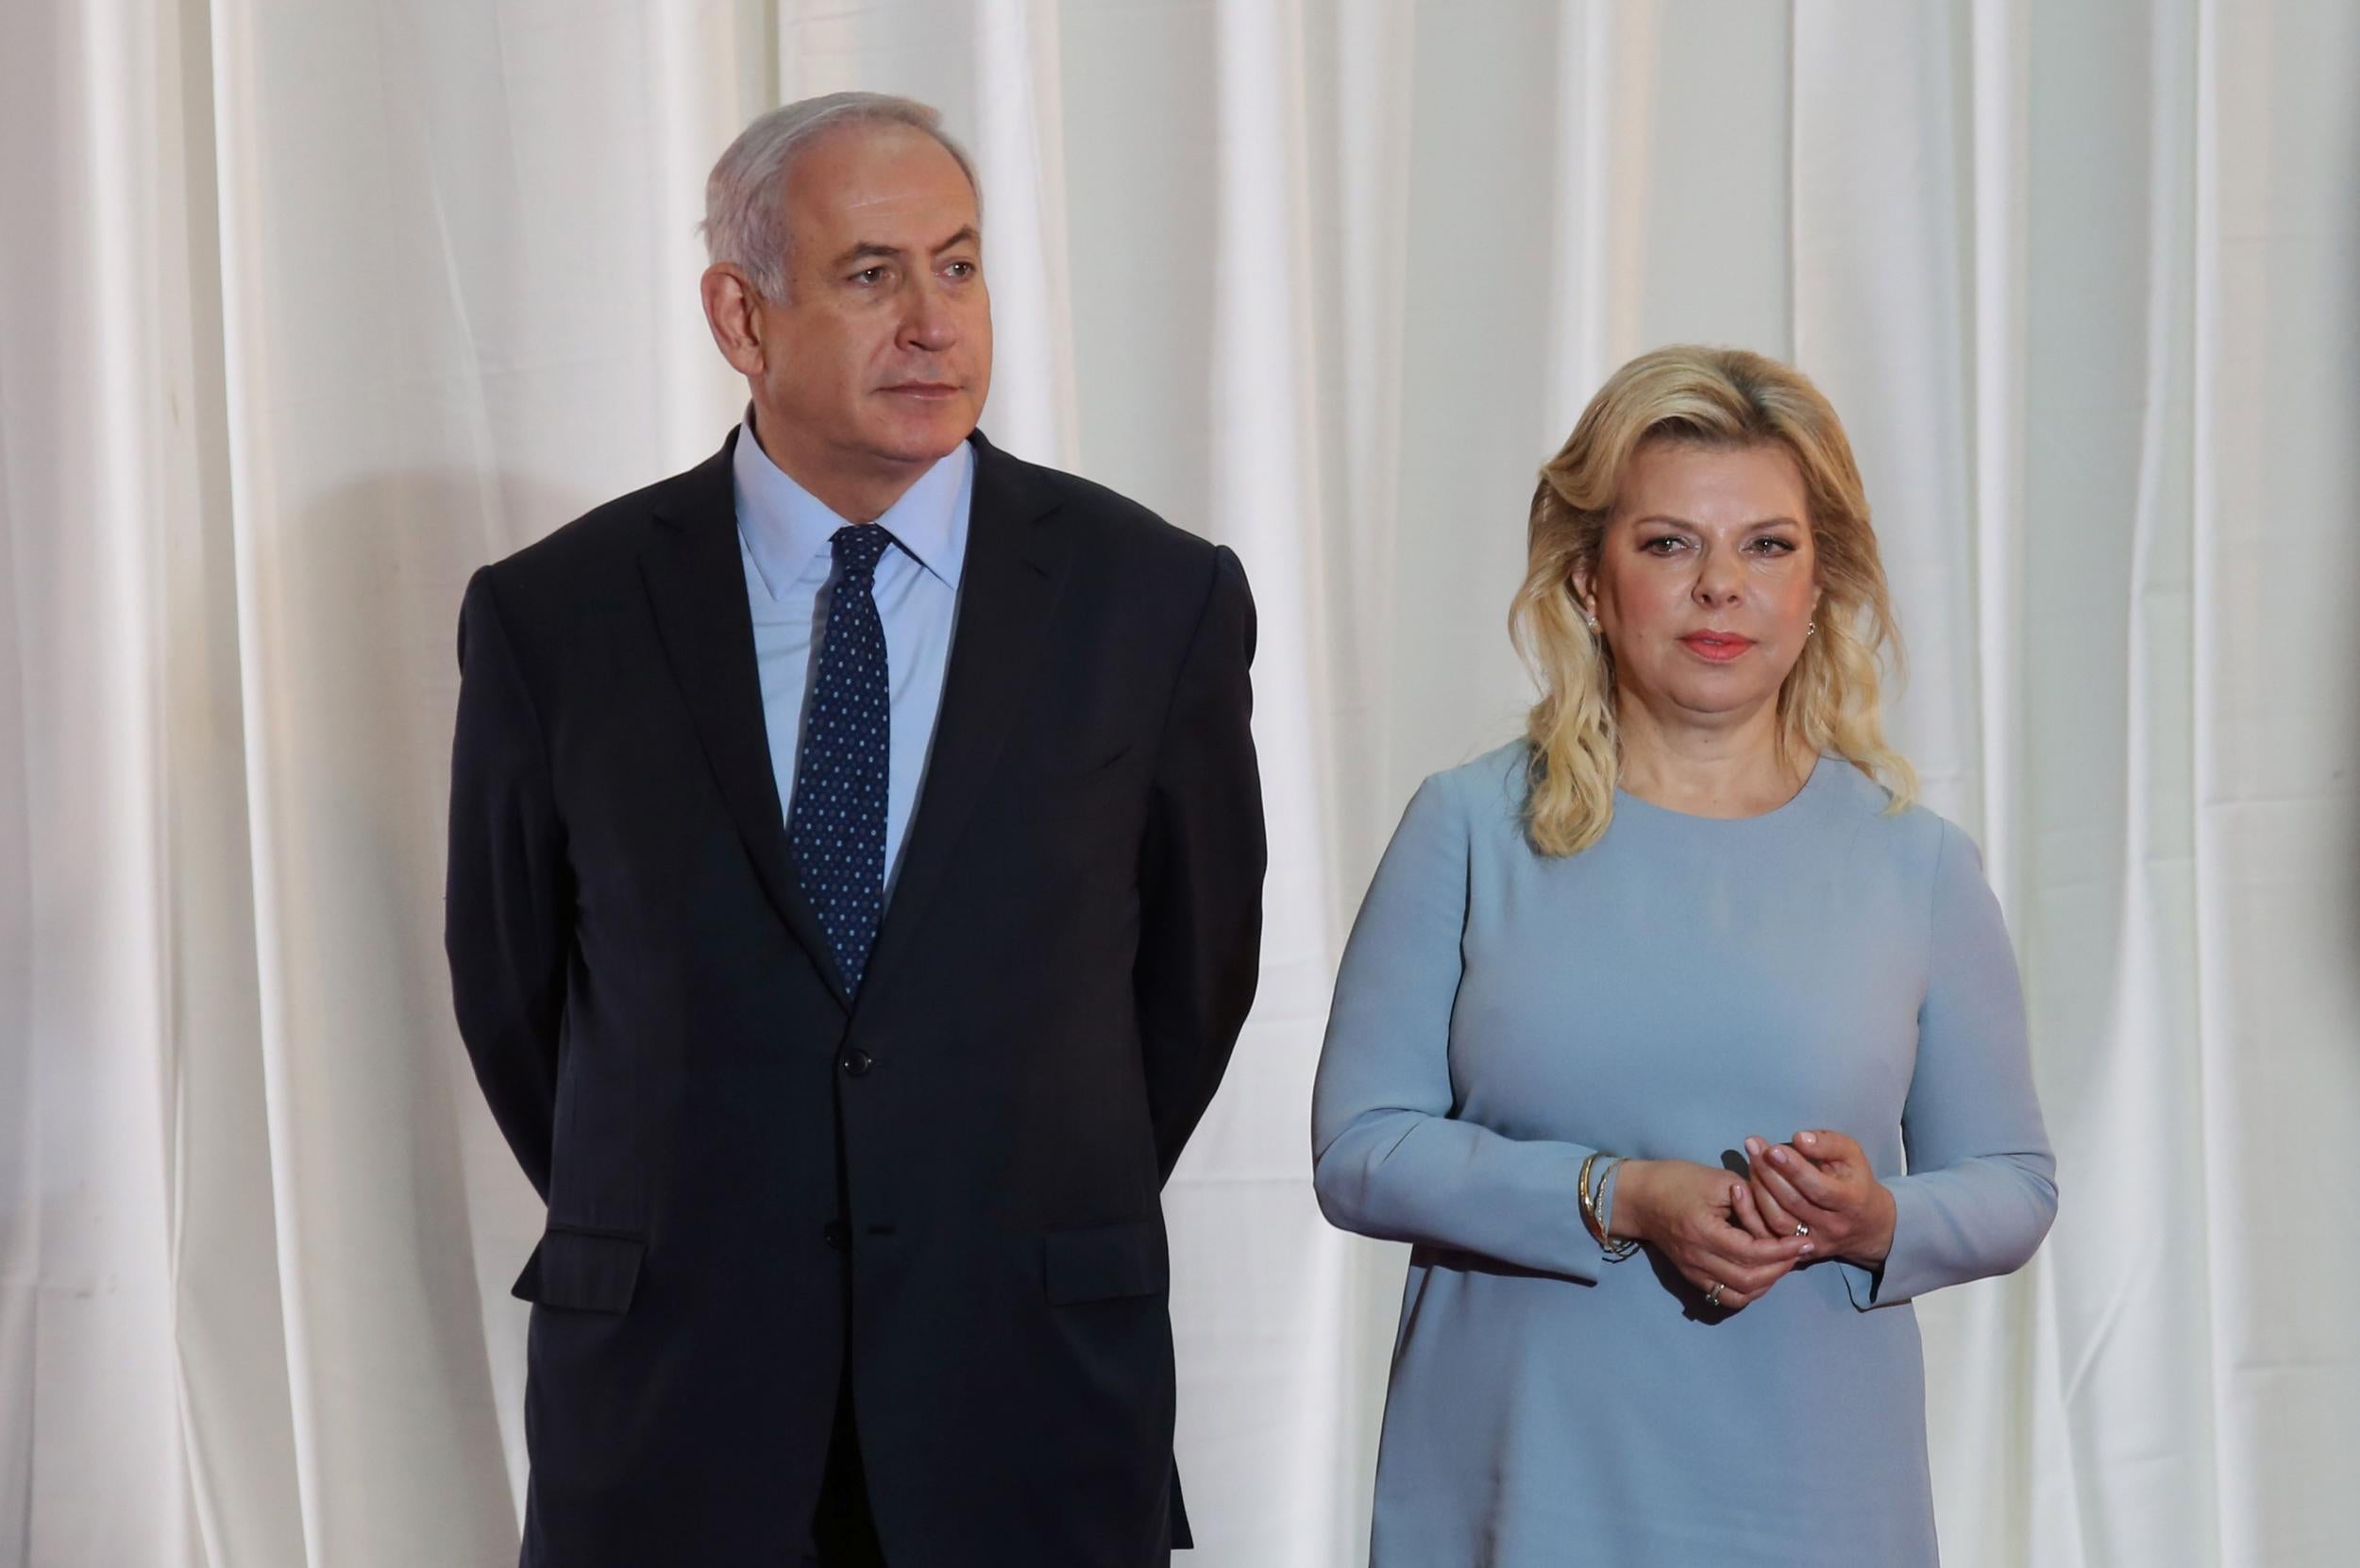 Both Sara and Benjamin Netanyahu are grappling with legal woes: the prime minister is currently under investigation in four different cases related to bribery, fraud and breach of trust